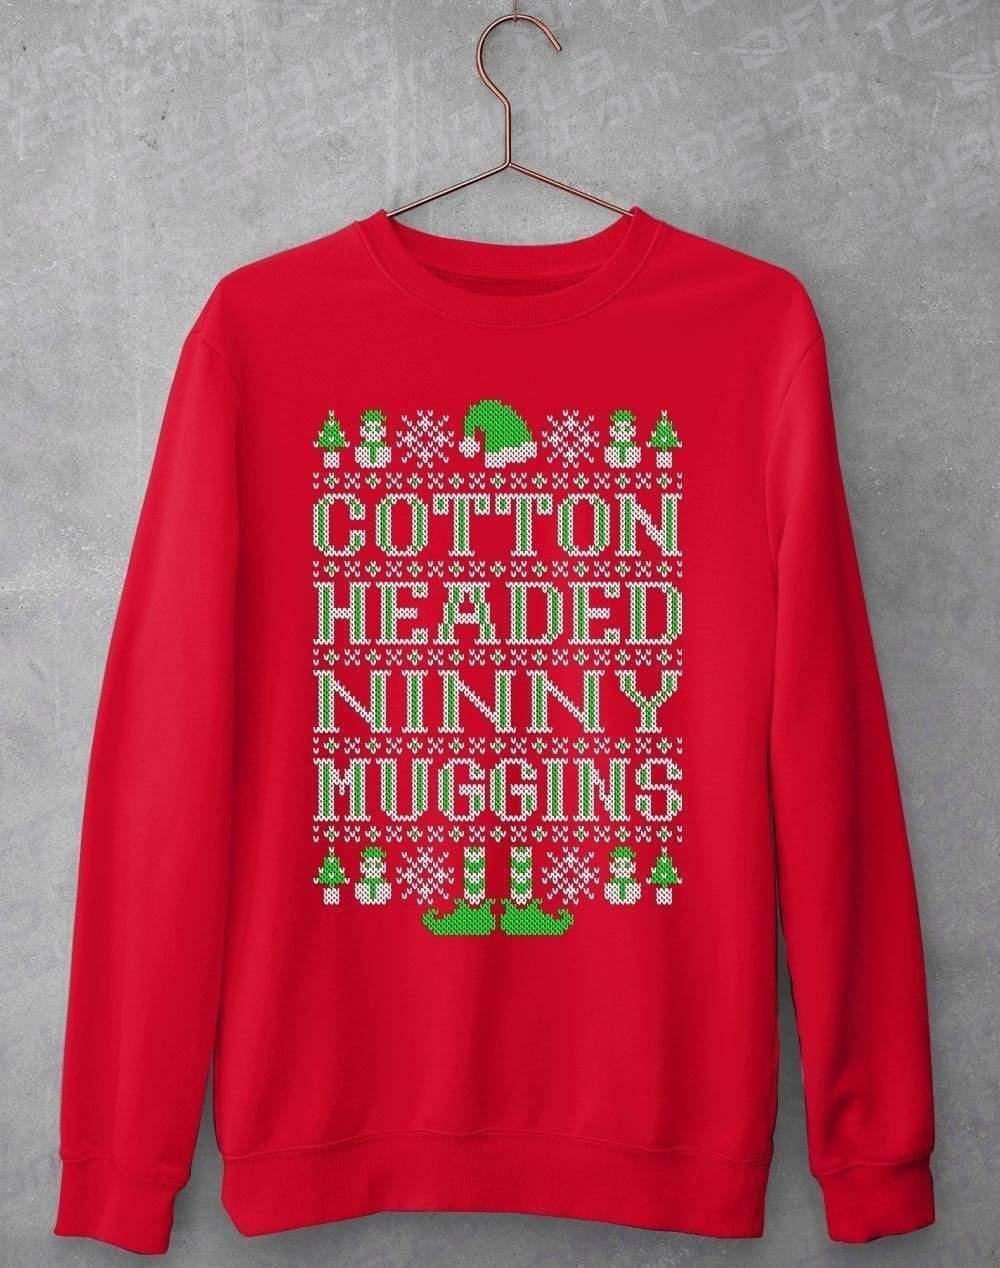 Cotton Headed Ninny Muggins Festive Knitted-Look Sweatshirt S / Fire Red  - Off World Tees